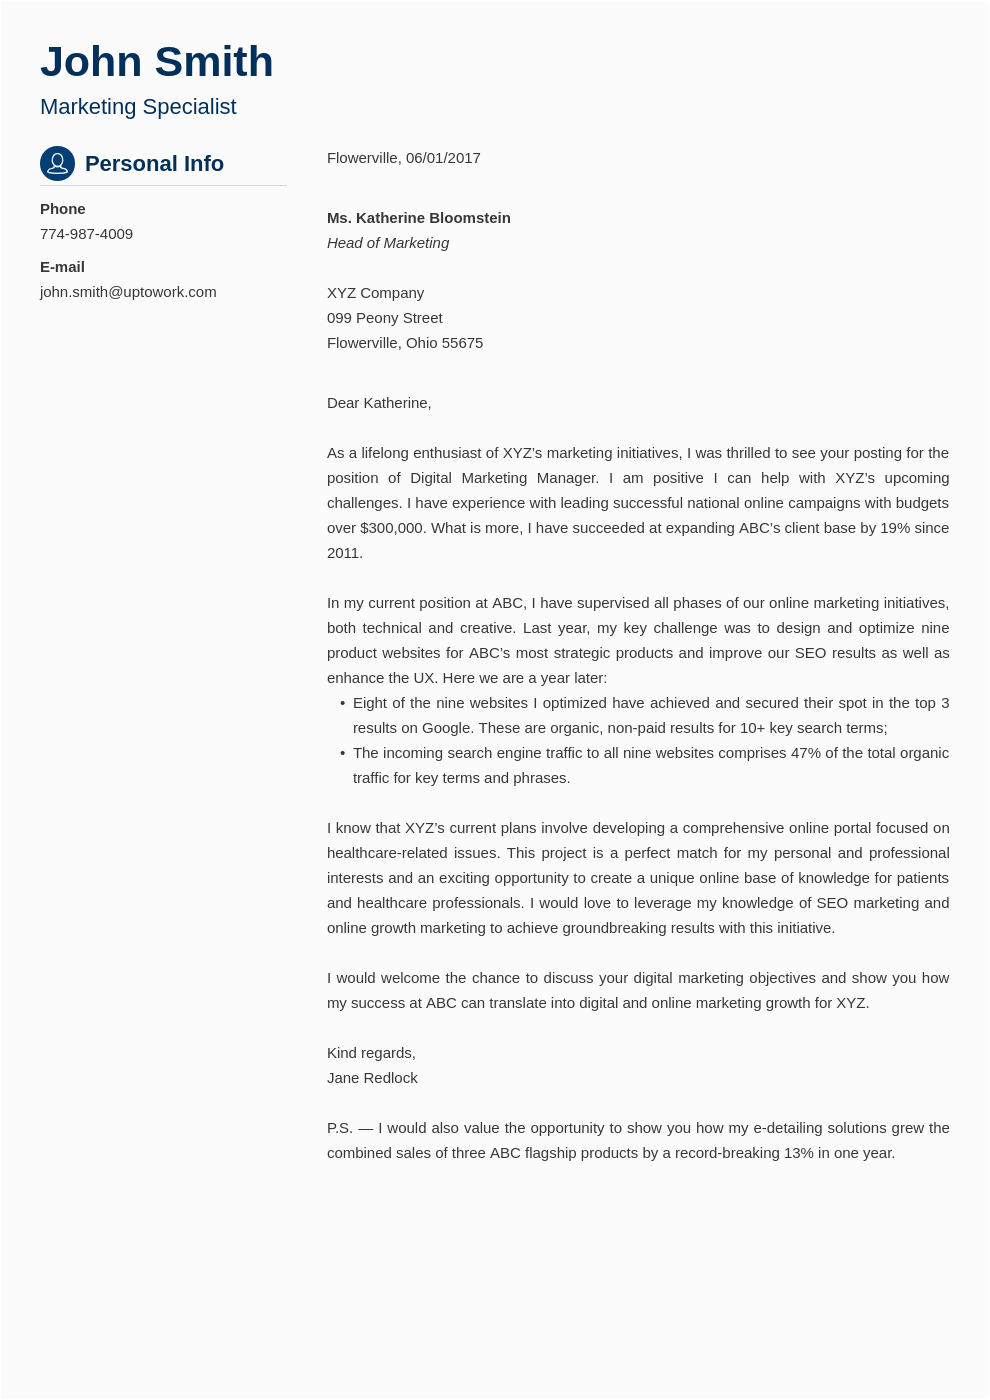 Resume and Cover Letter Template Free Download 18 Cover Letter Templates for Any Job Application